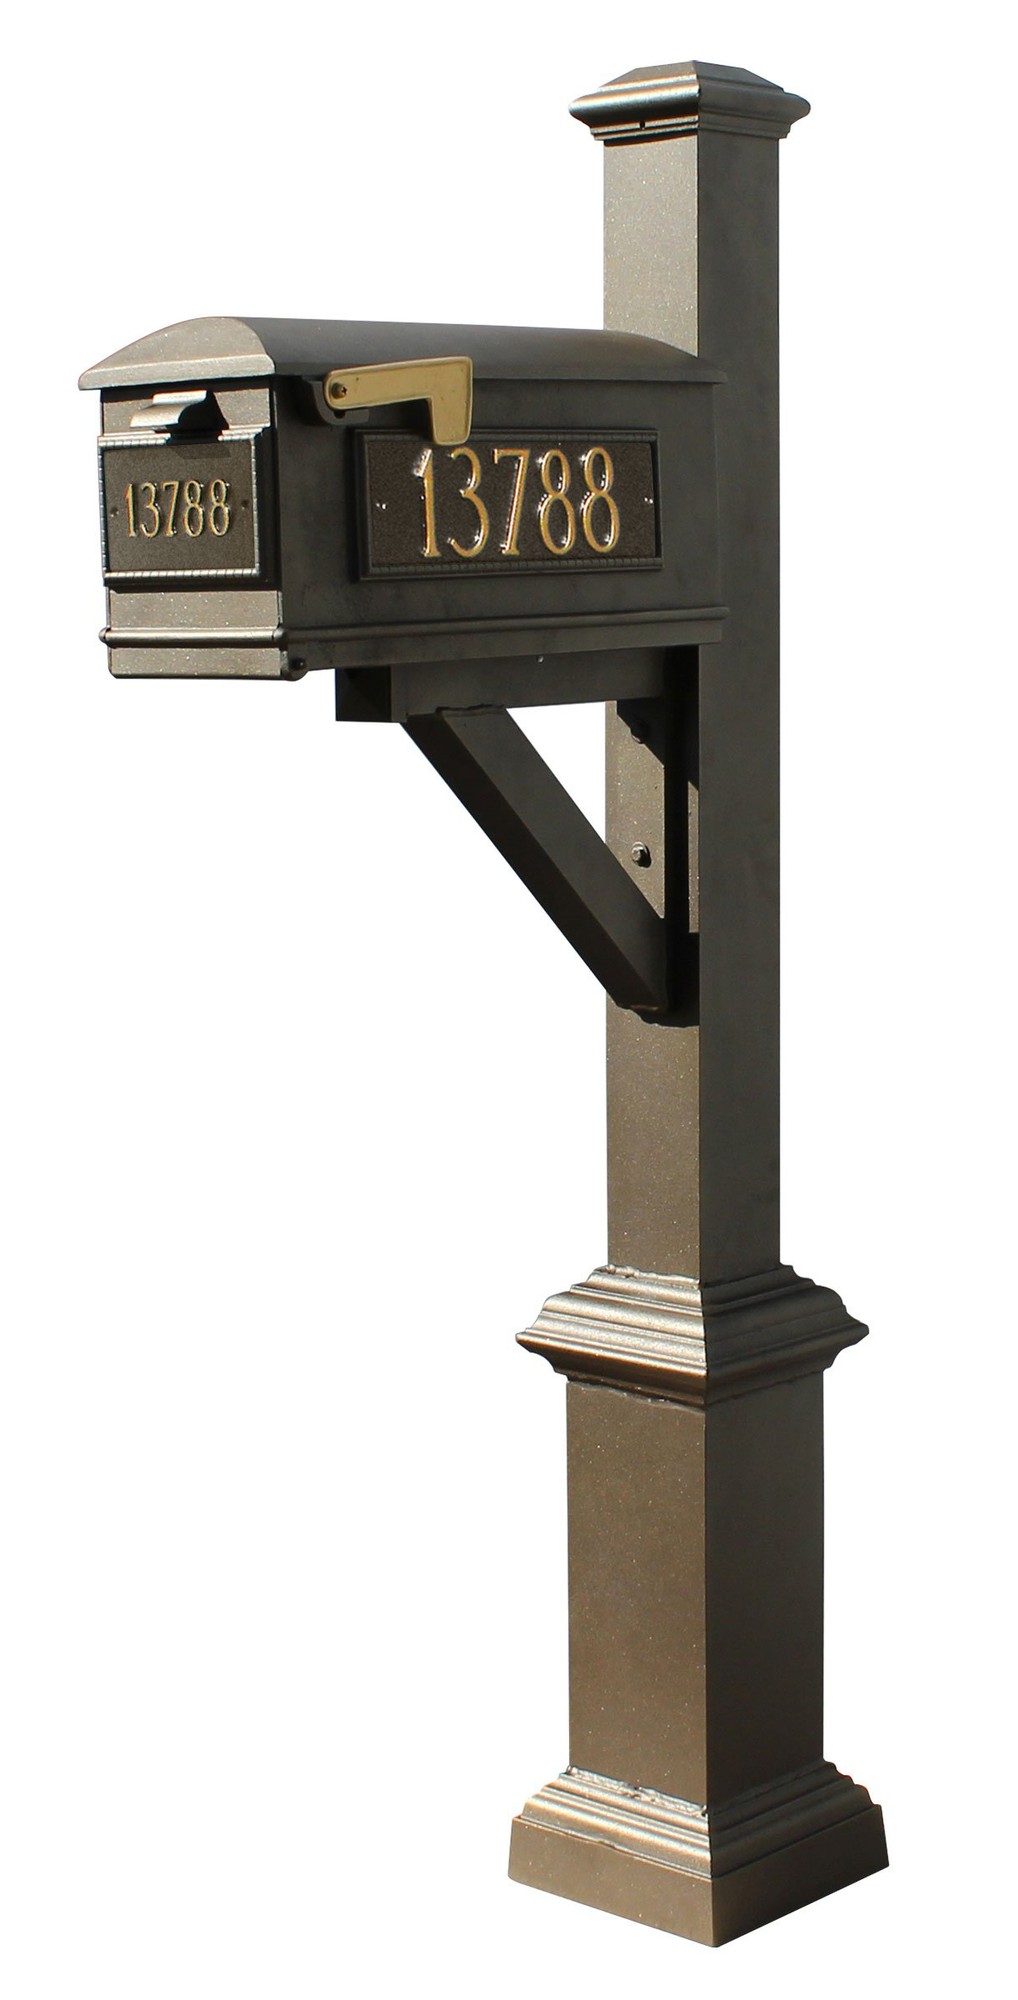 Westhaven System with Lewiston Mailbox, (3 Cast Plates) Square Base & Pyramid Finial in (Bronze)